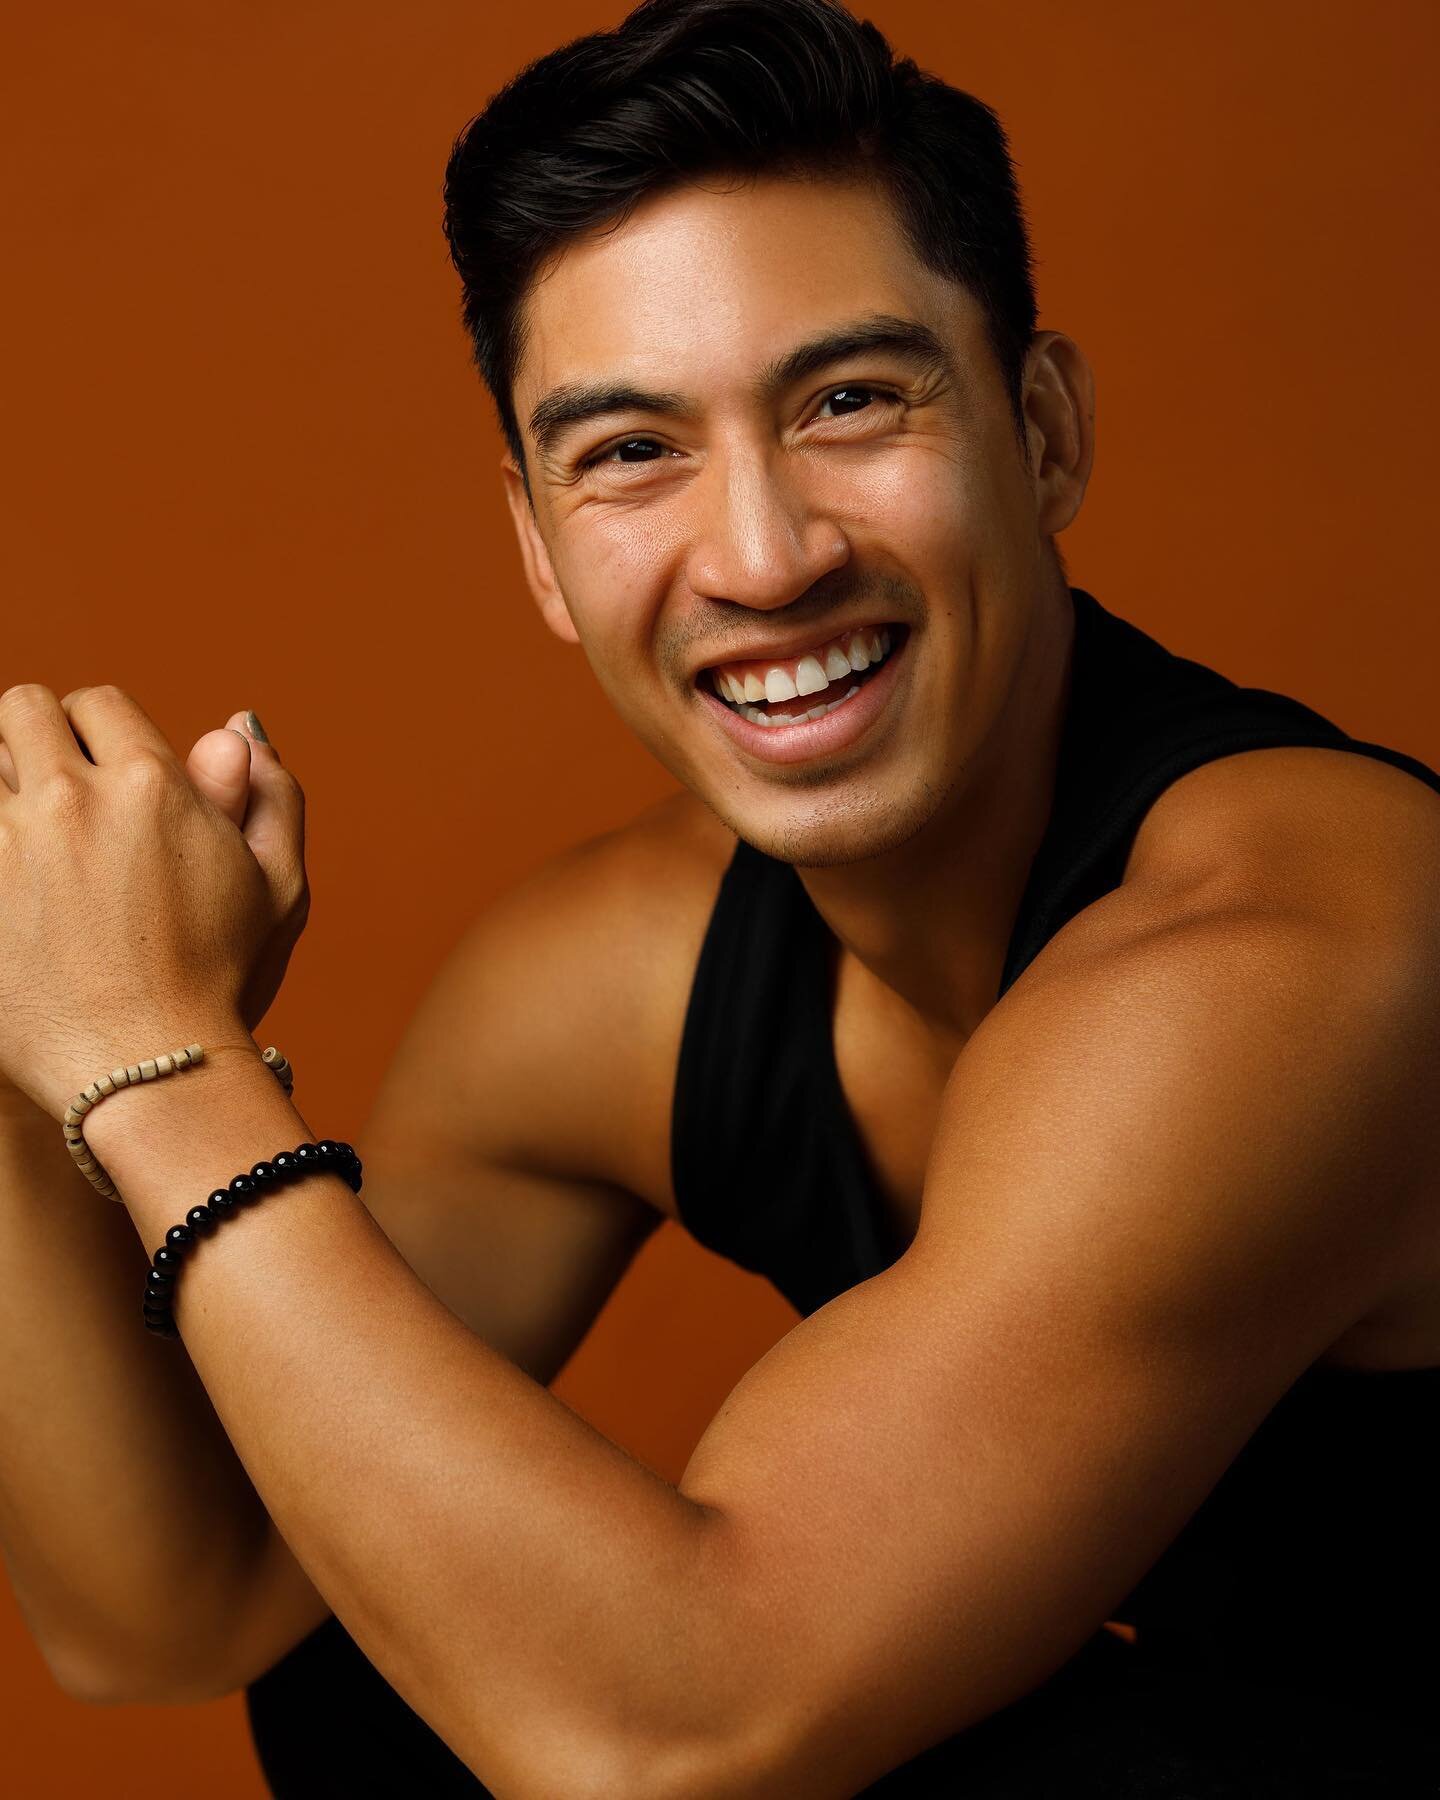 🚨 NEW HEADSHOT: &ldquo;Pinoy Joy!&rdquo;
📷 the amazing @michaelhullphoto 

The final #filipino #funfact #Friday to close out Filipino American History Month!

💛 In 2018, over 2 million Filipinos lived in the United States, accounting for 4.5 perce